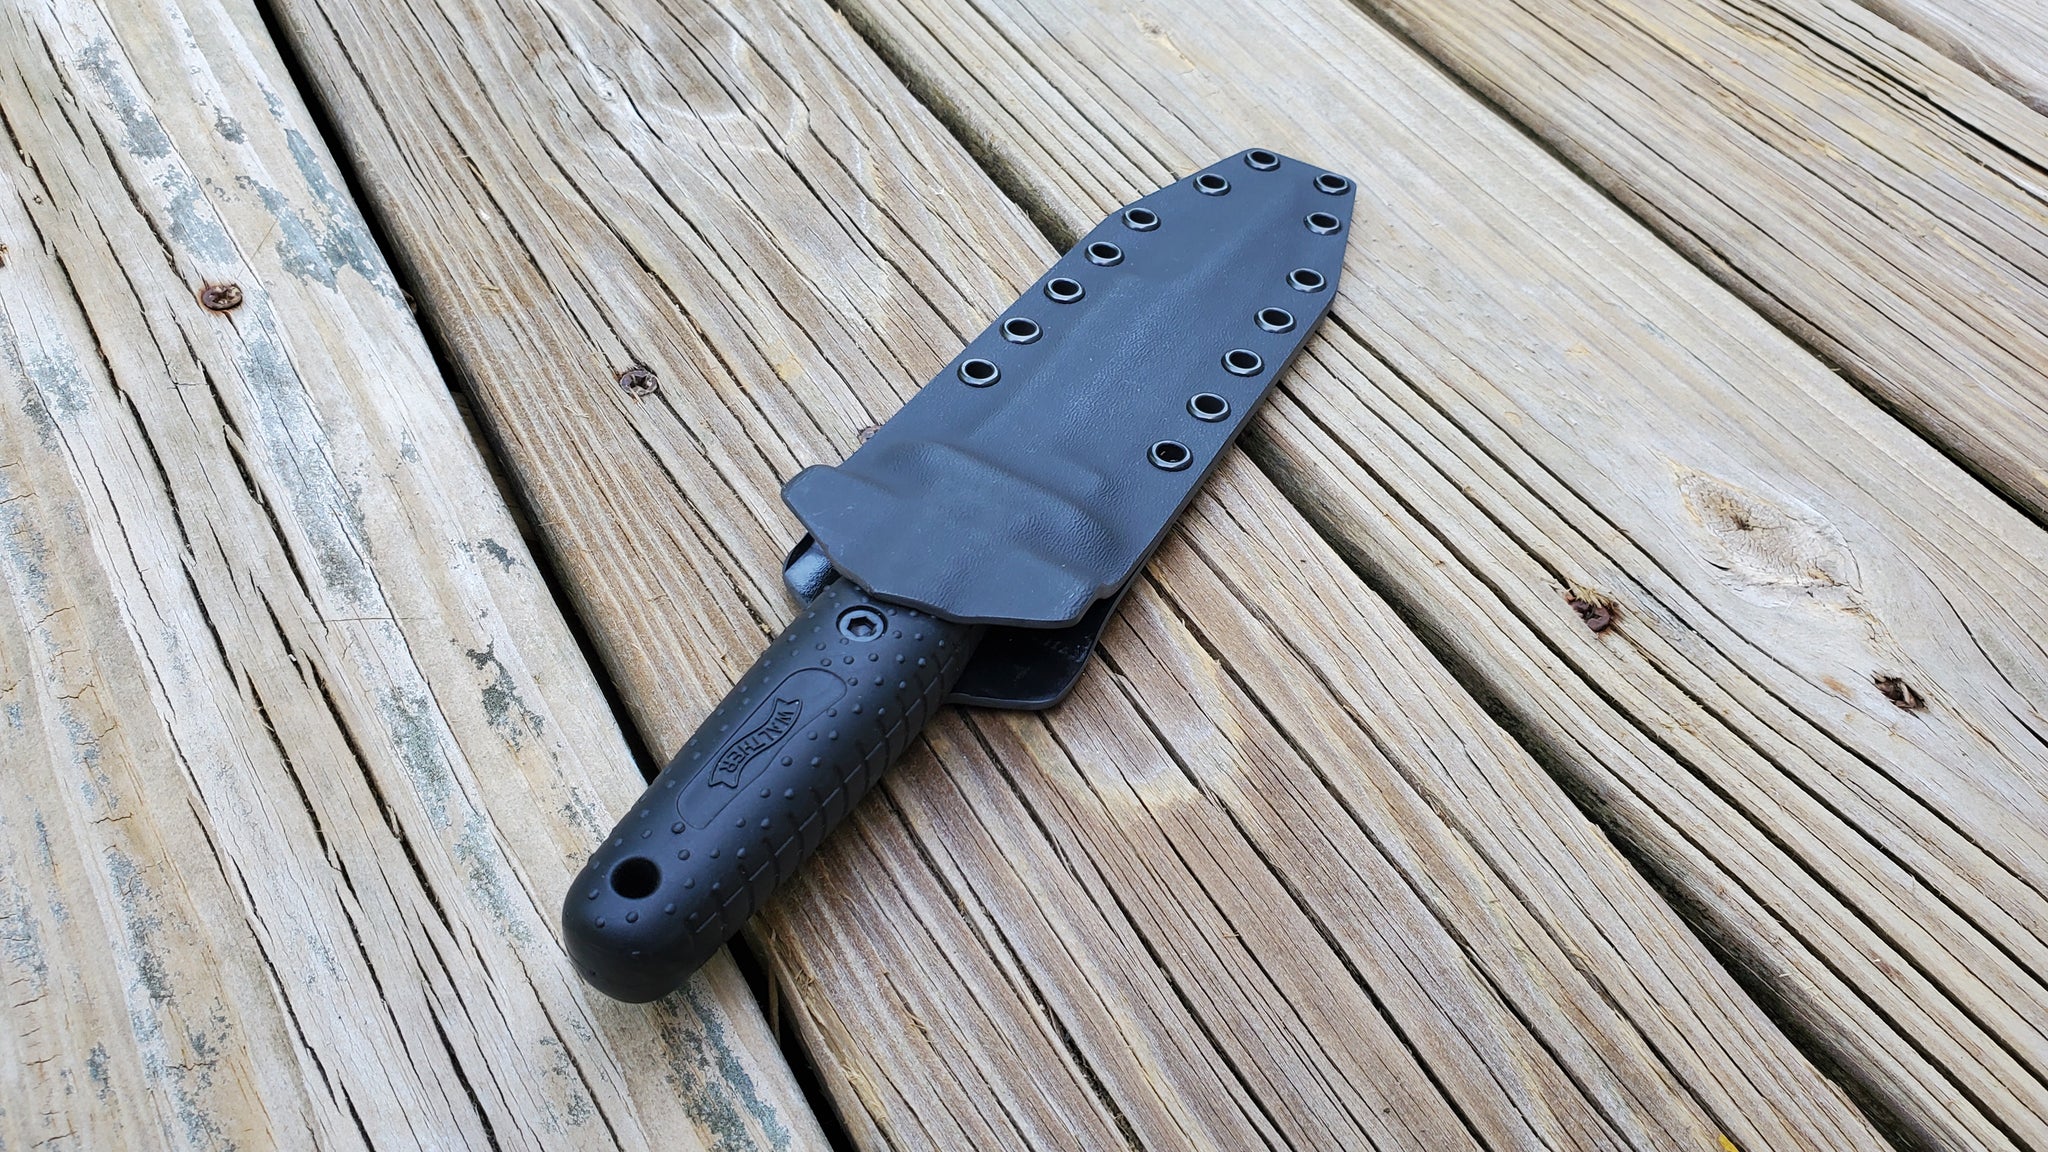 WALTHER P99 Tactical Knife Kydex Sheath